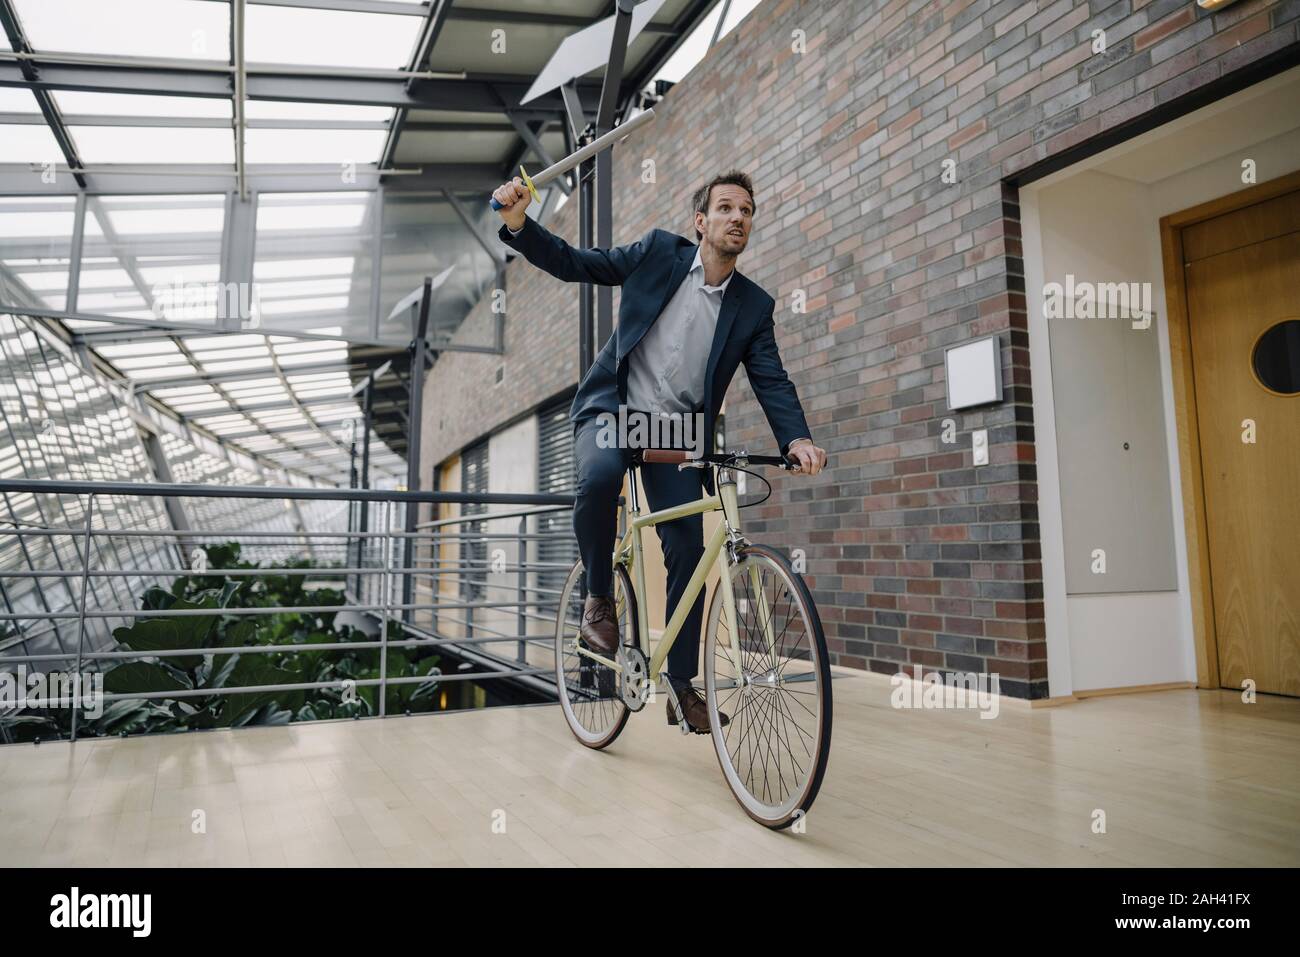 Businessman holding a toy sword and riding bicycle in modern office building Stock Photo